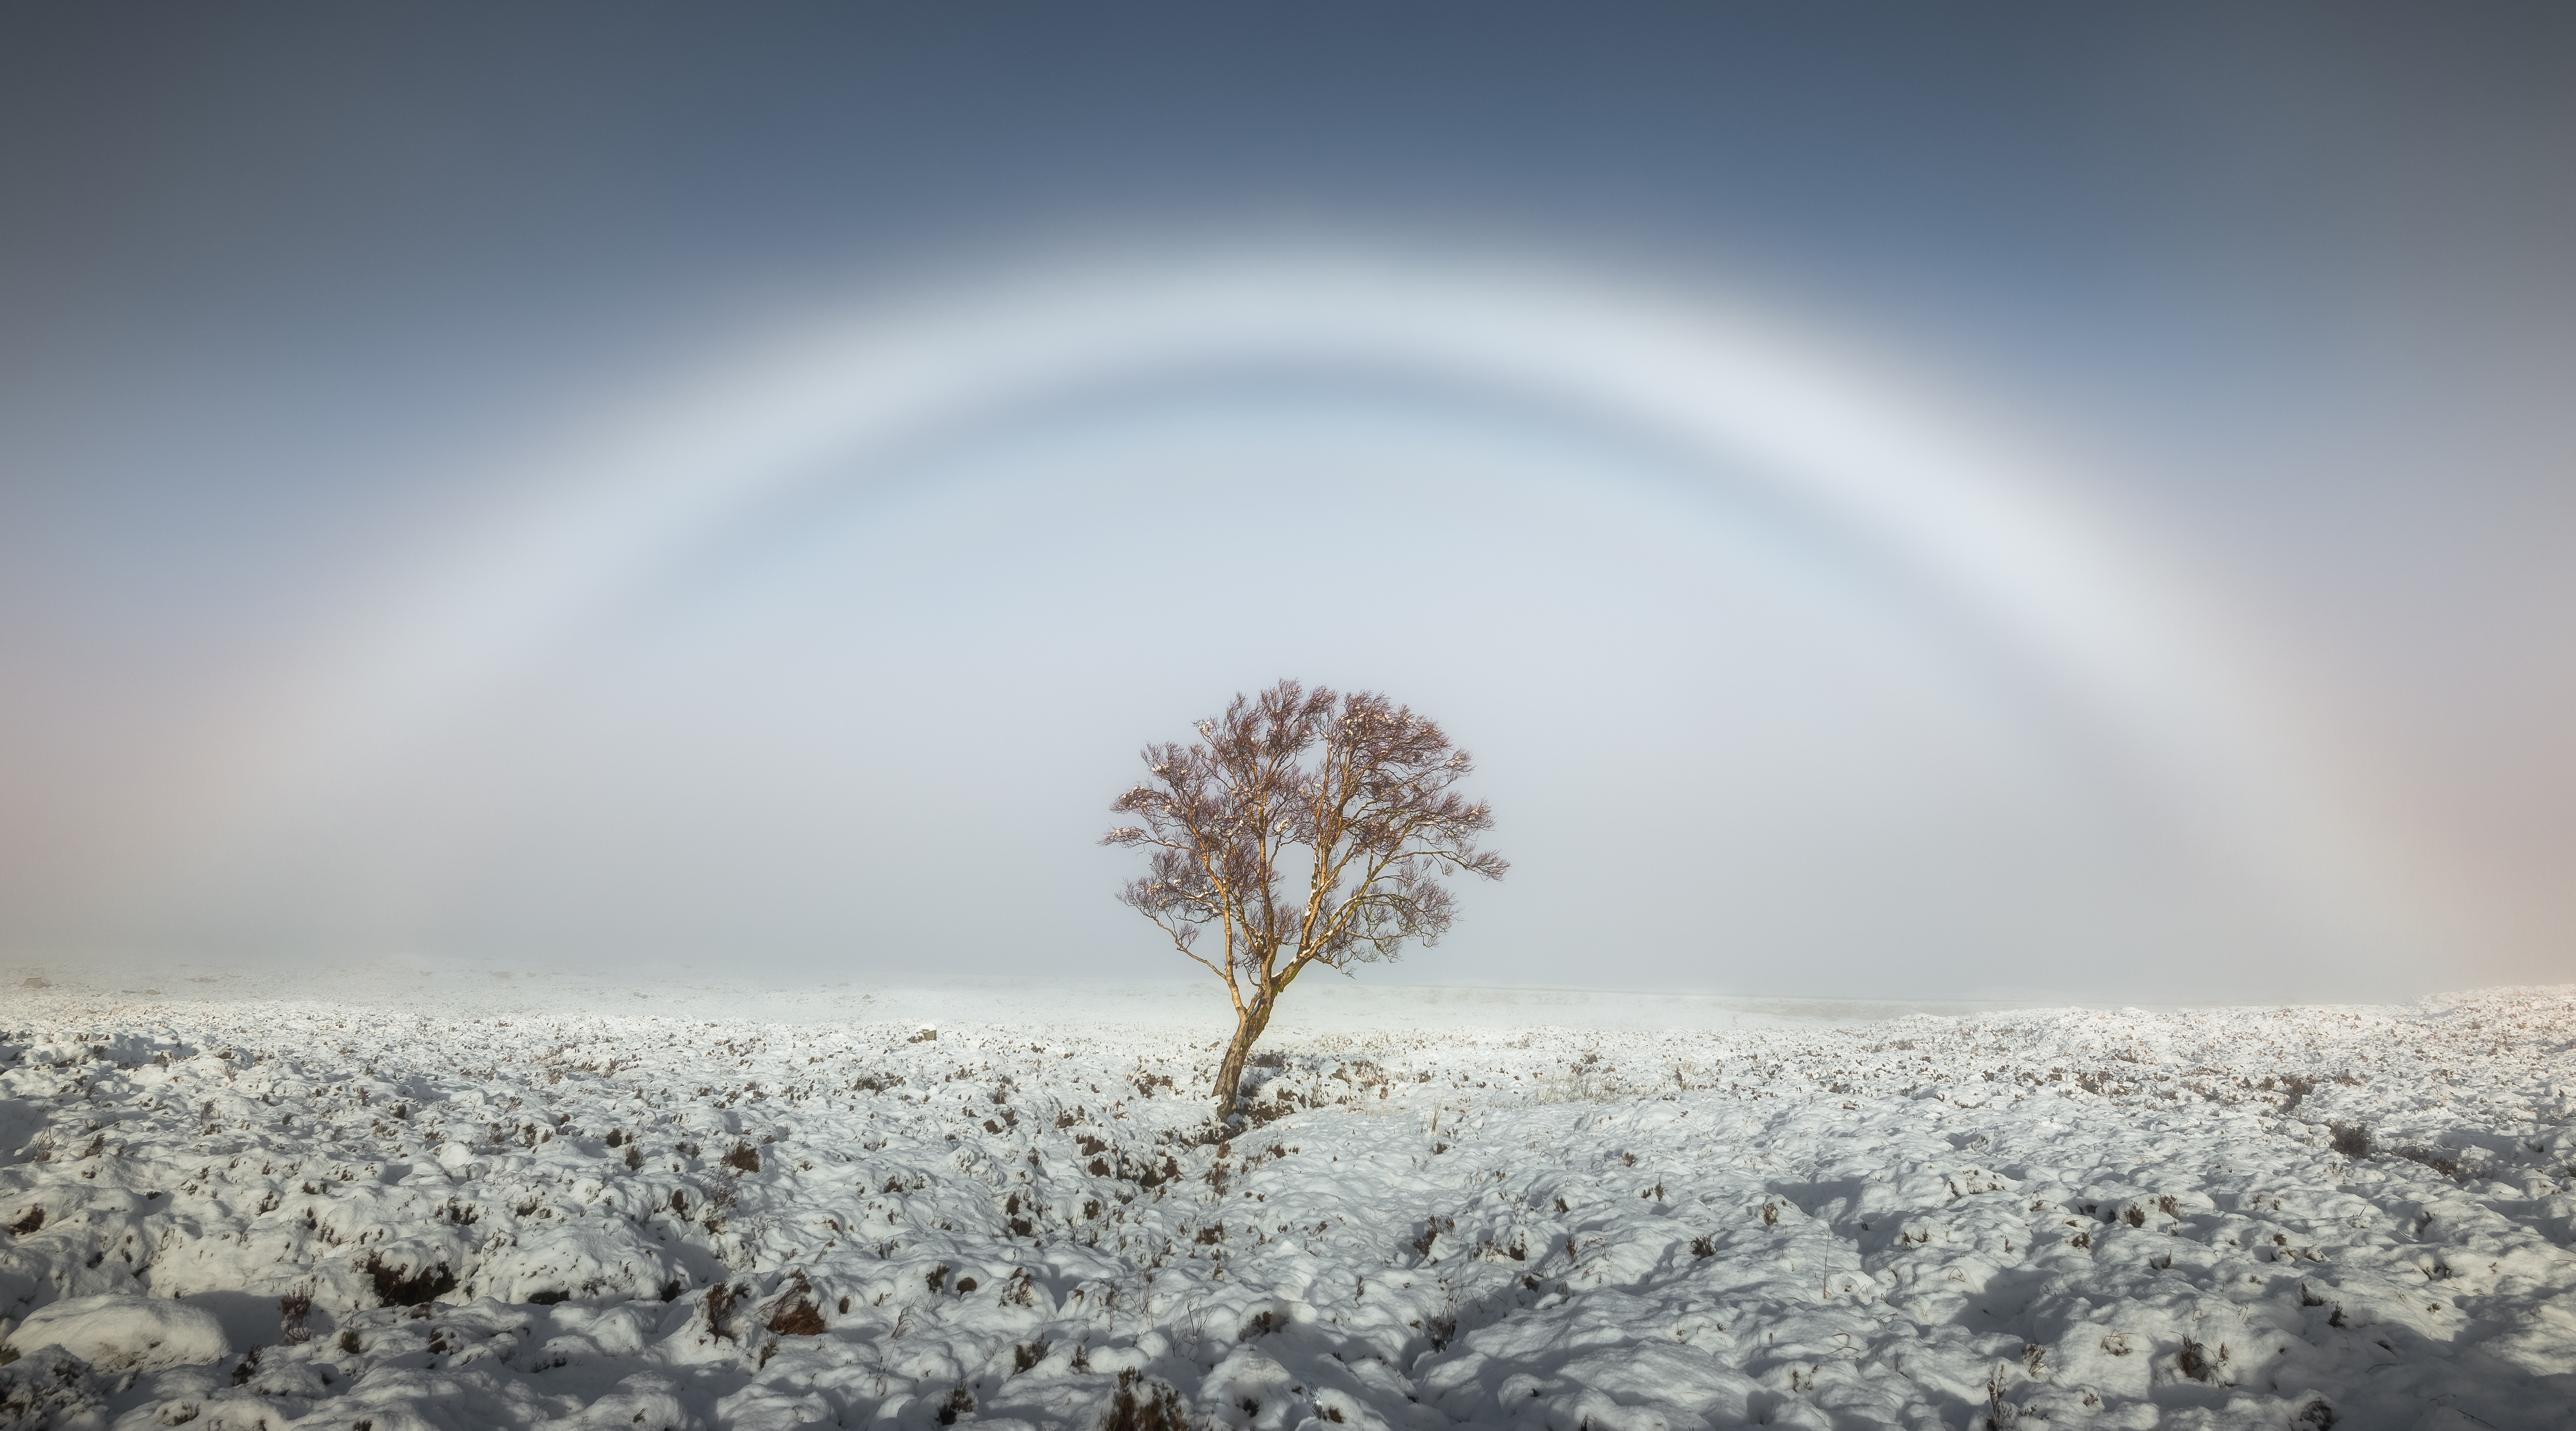 Fogbow over a snowy tree